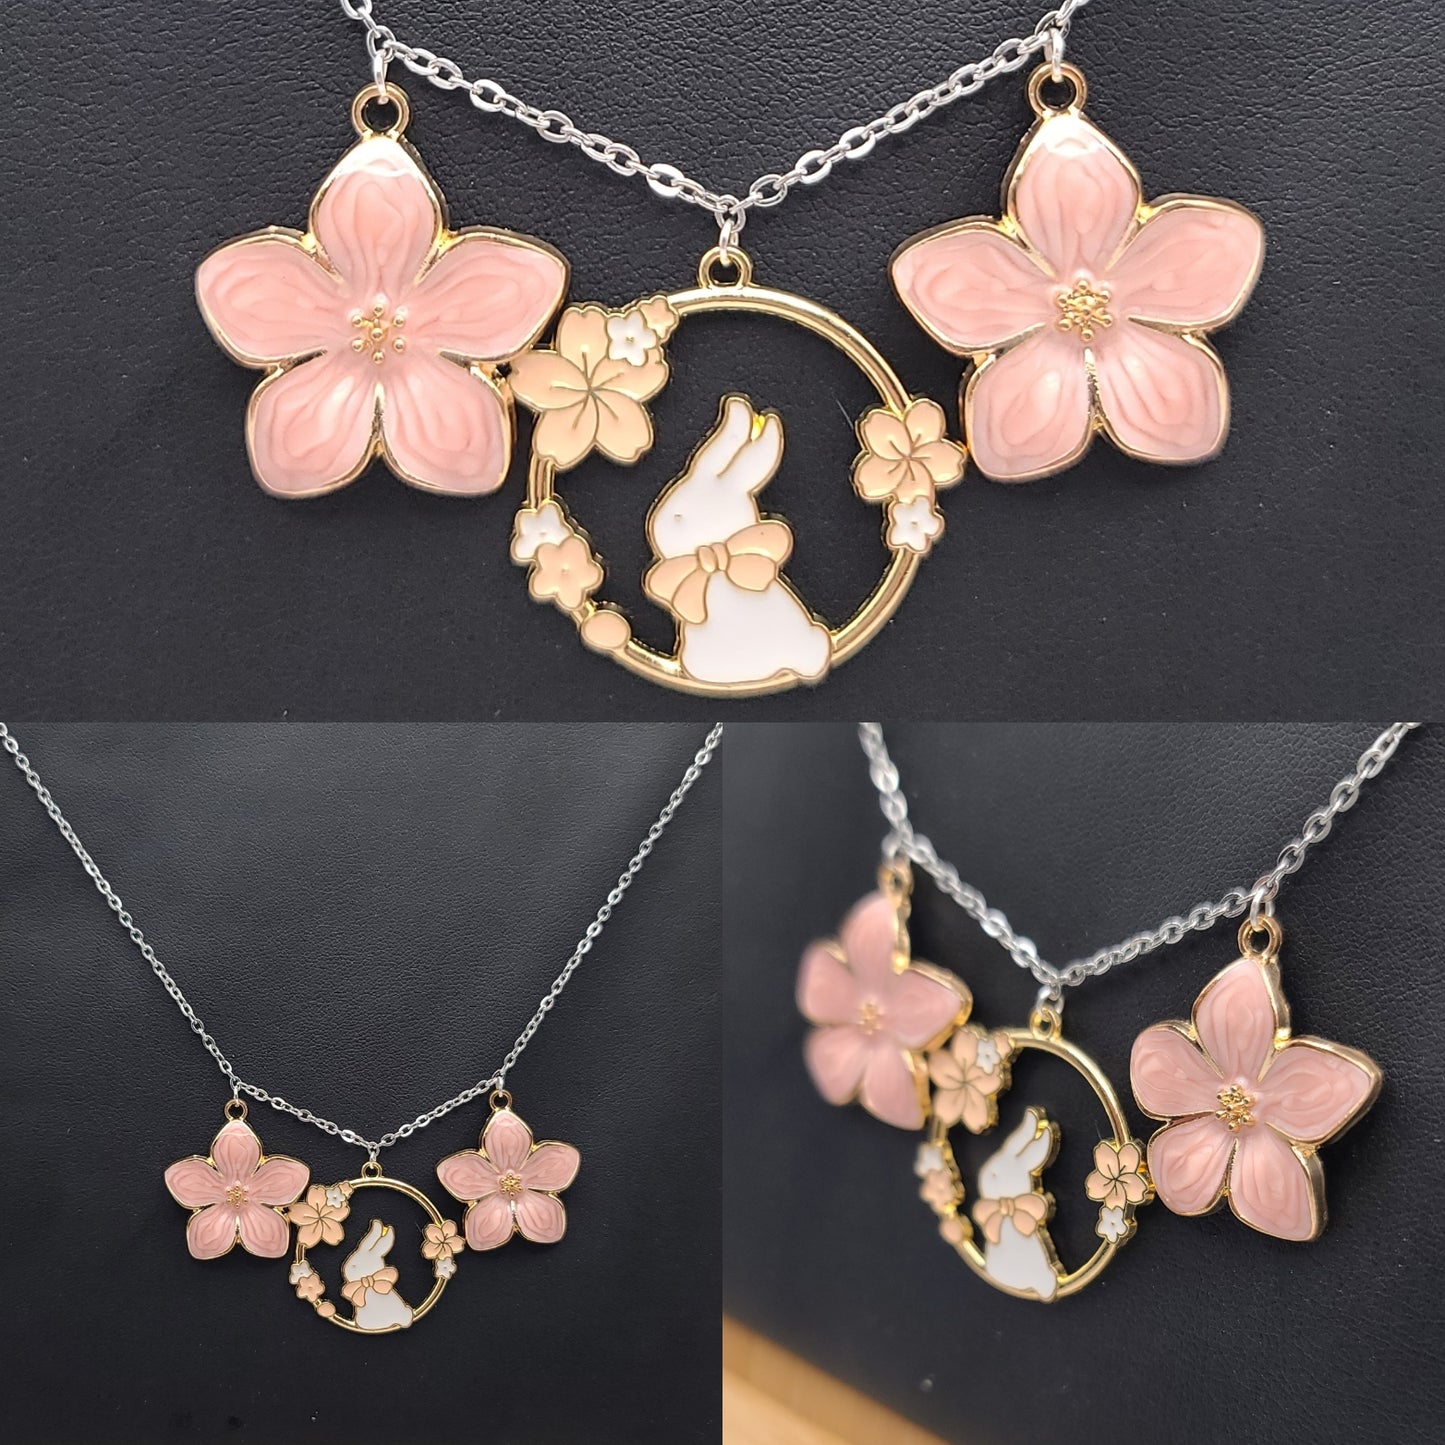 White Cherry Blossom Charms Necklace